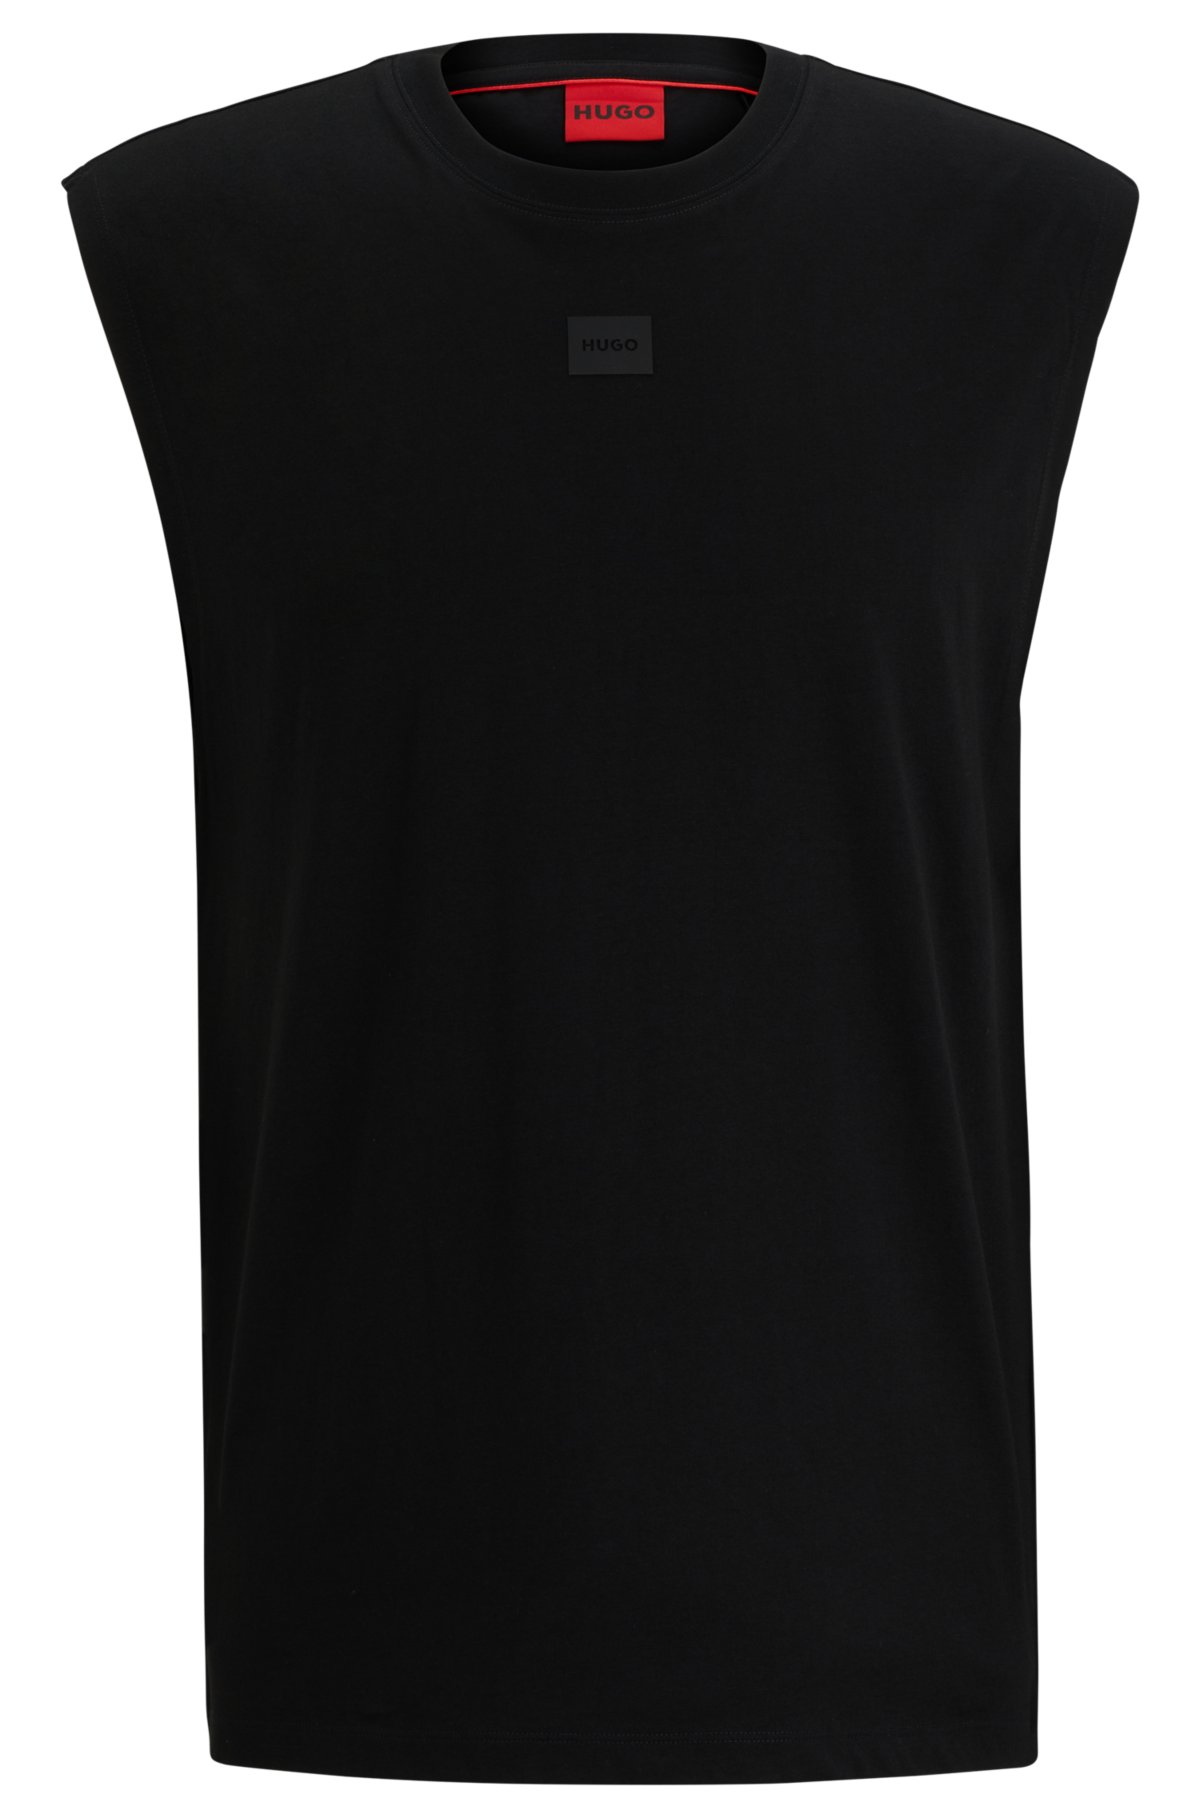 HUGO - Sleeveless T-shirt in cotton jersey with logo detail